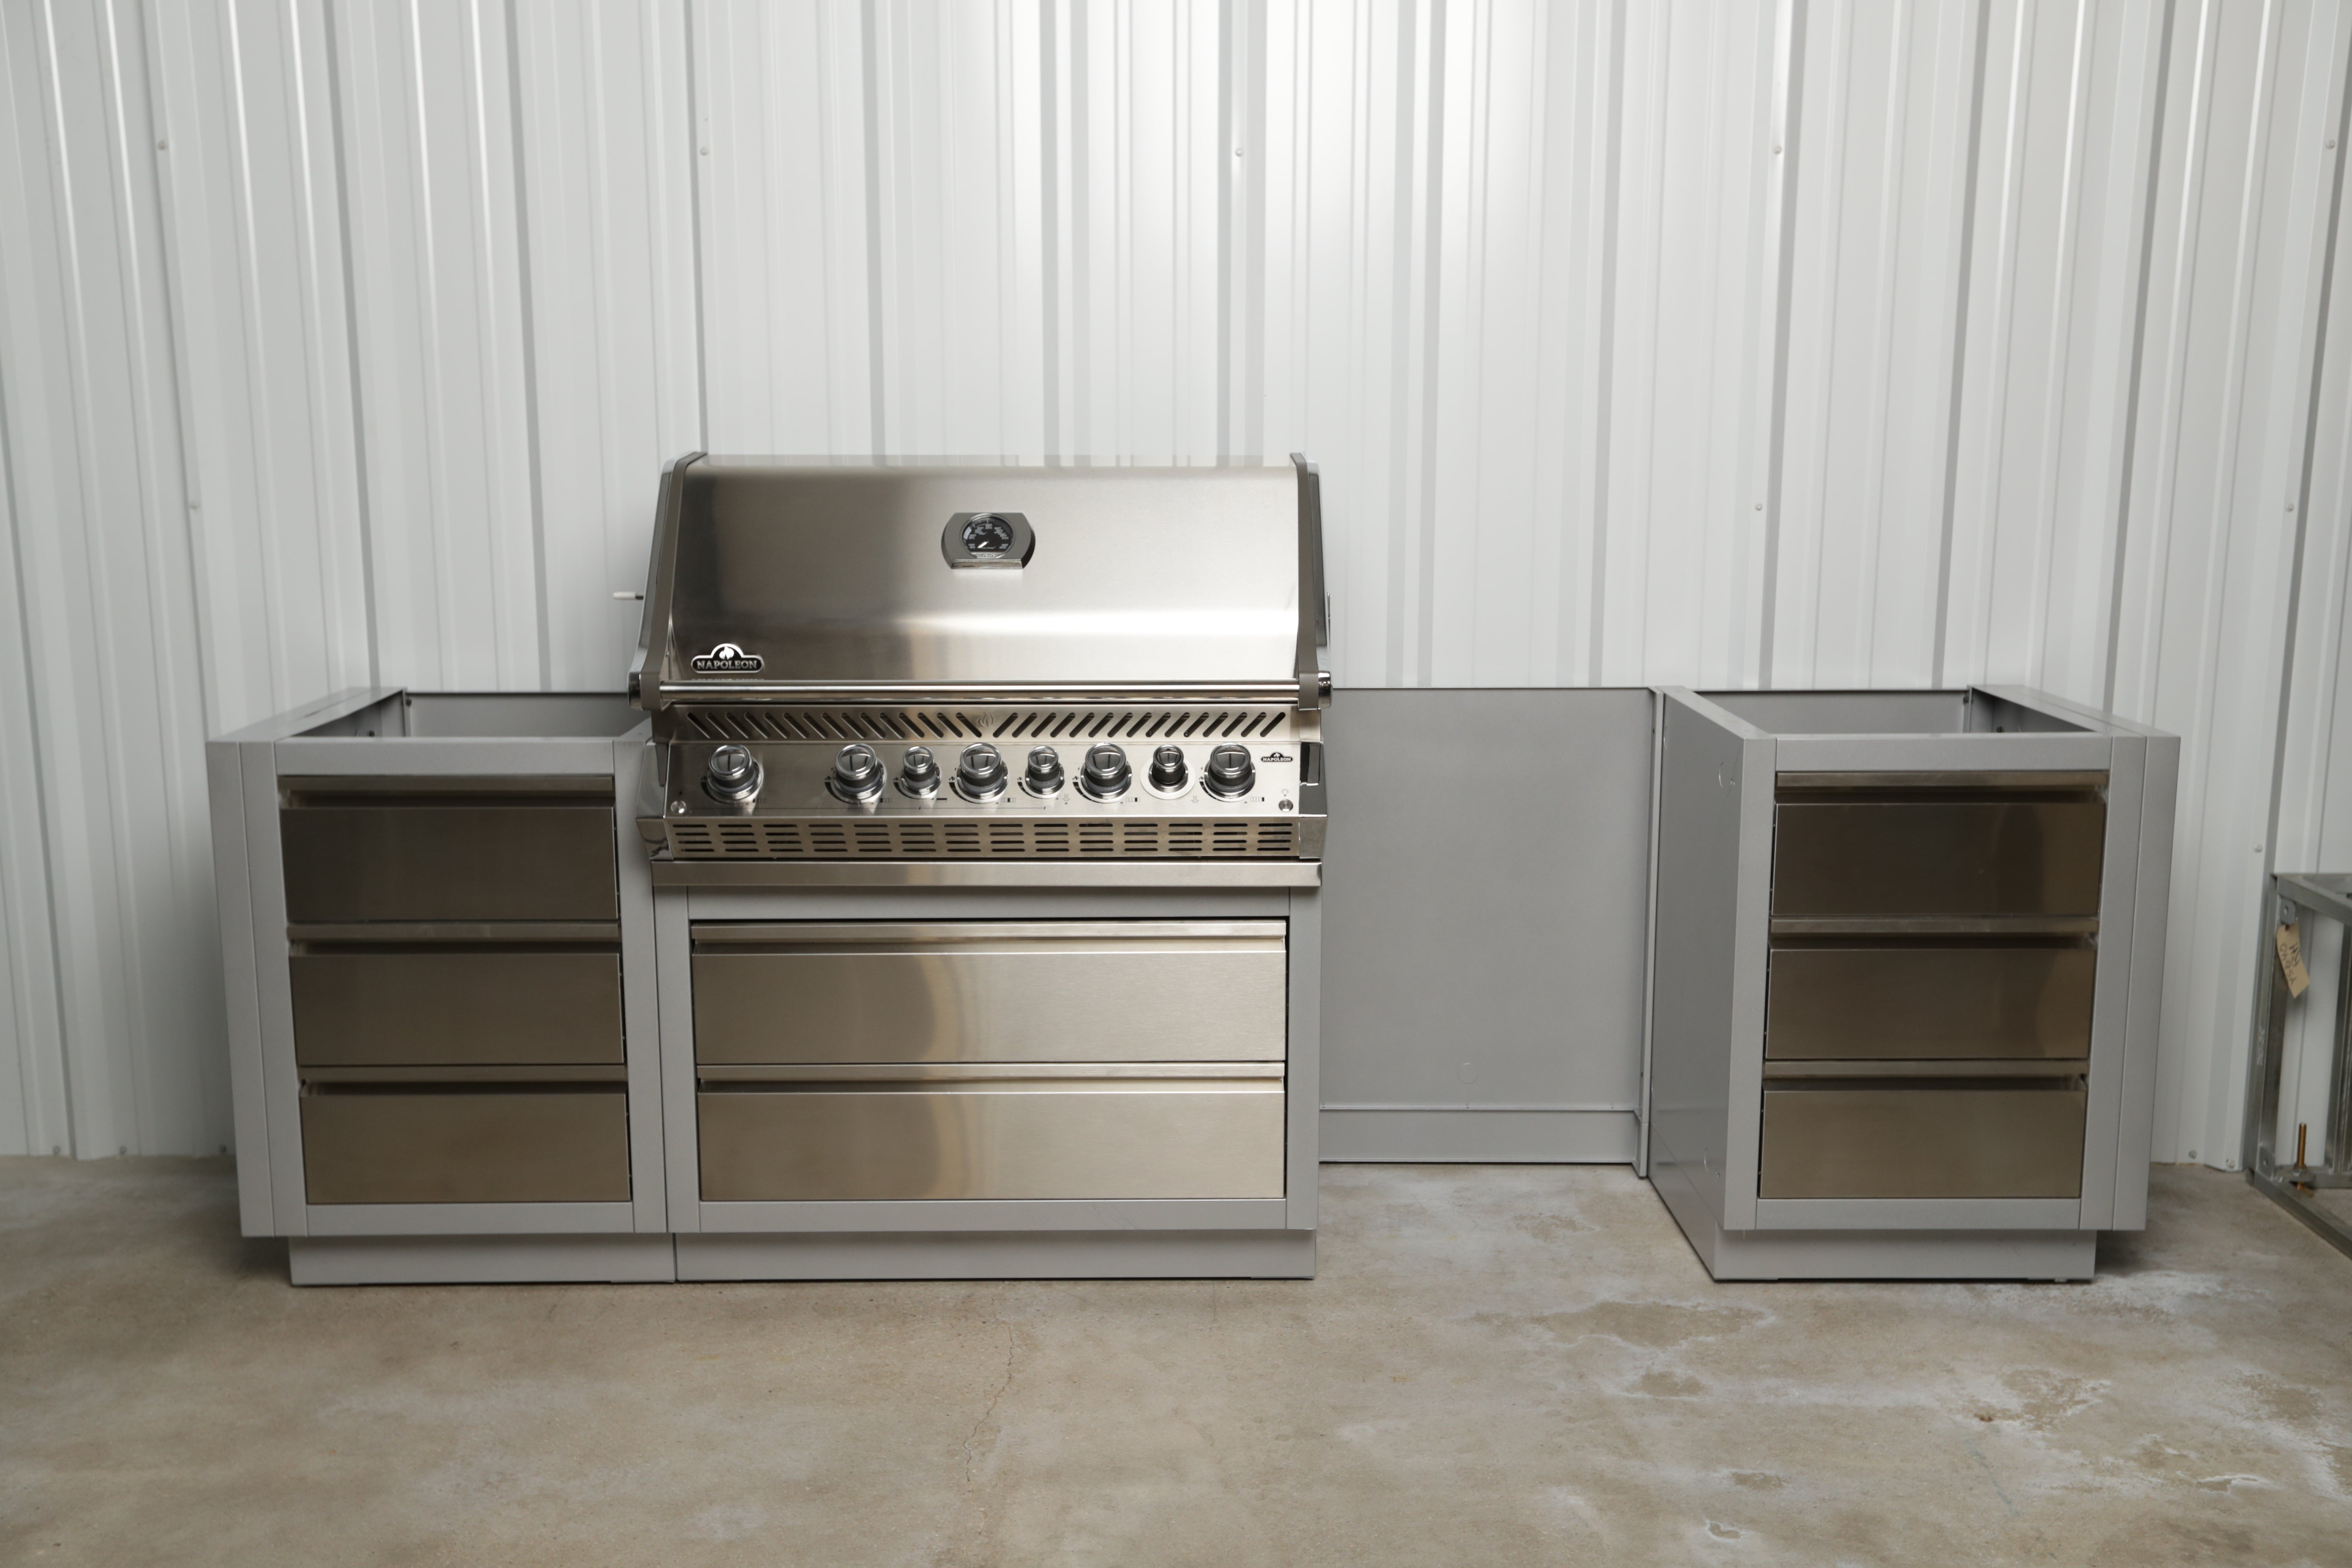 Local Special, Napoleon Oasis Display with BIPRO665RBNSS-3 Grill 12044501